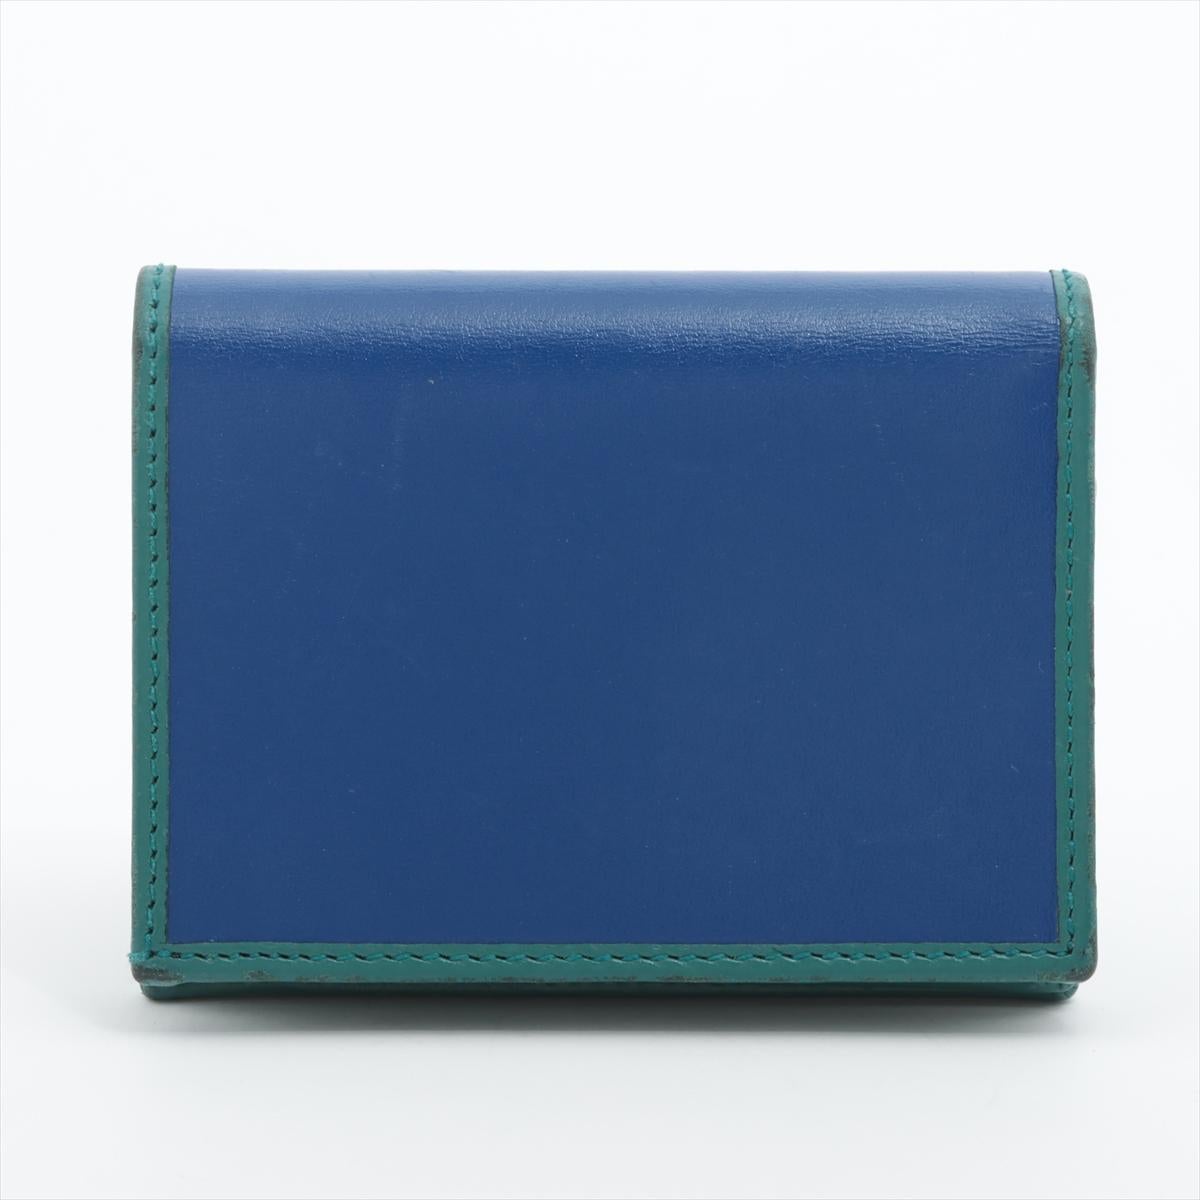 Gucci Horse Bits Leather Compact Wallet Blue x Green In Good Condition For Sale In Indianapolis, IN